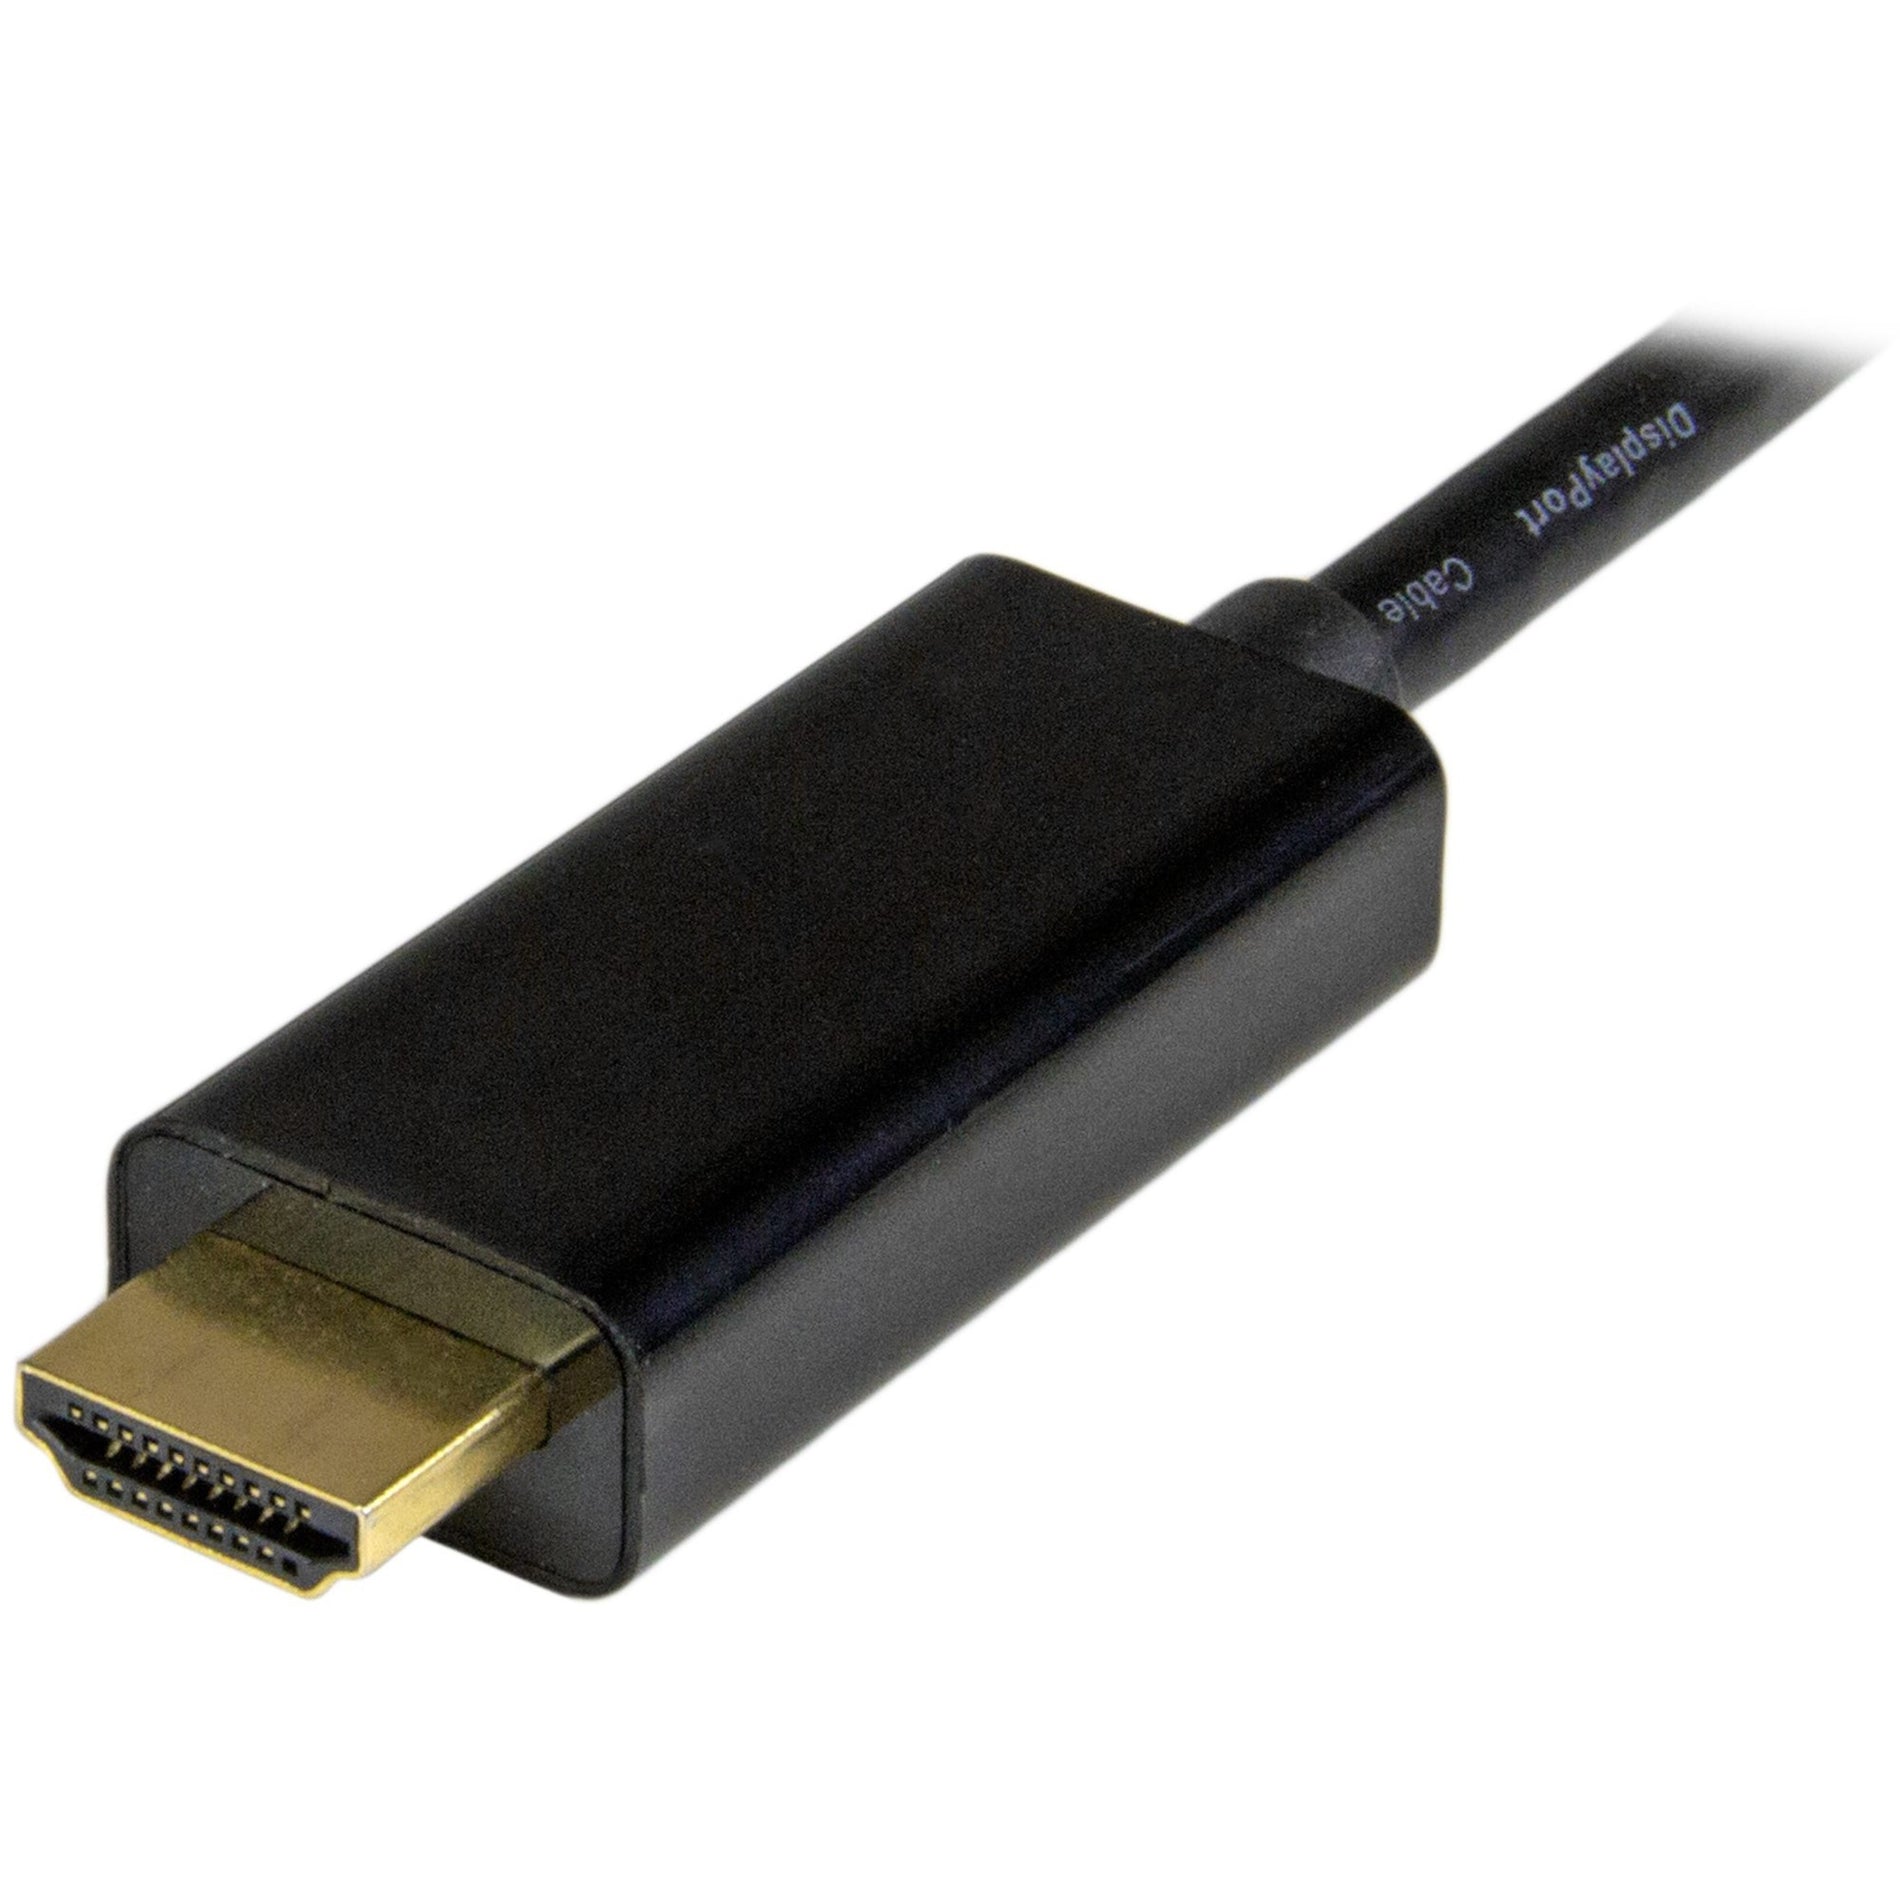 StarTech.com MDP2HDMM1MB Mini DisplayPort to HDMI Converter Cable - 3 ft (1m), 4K